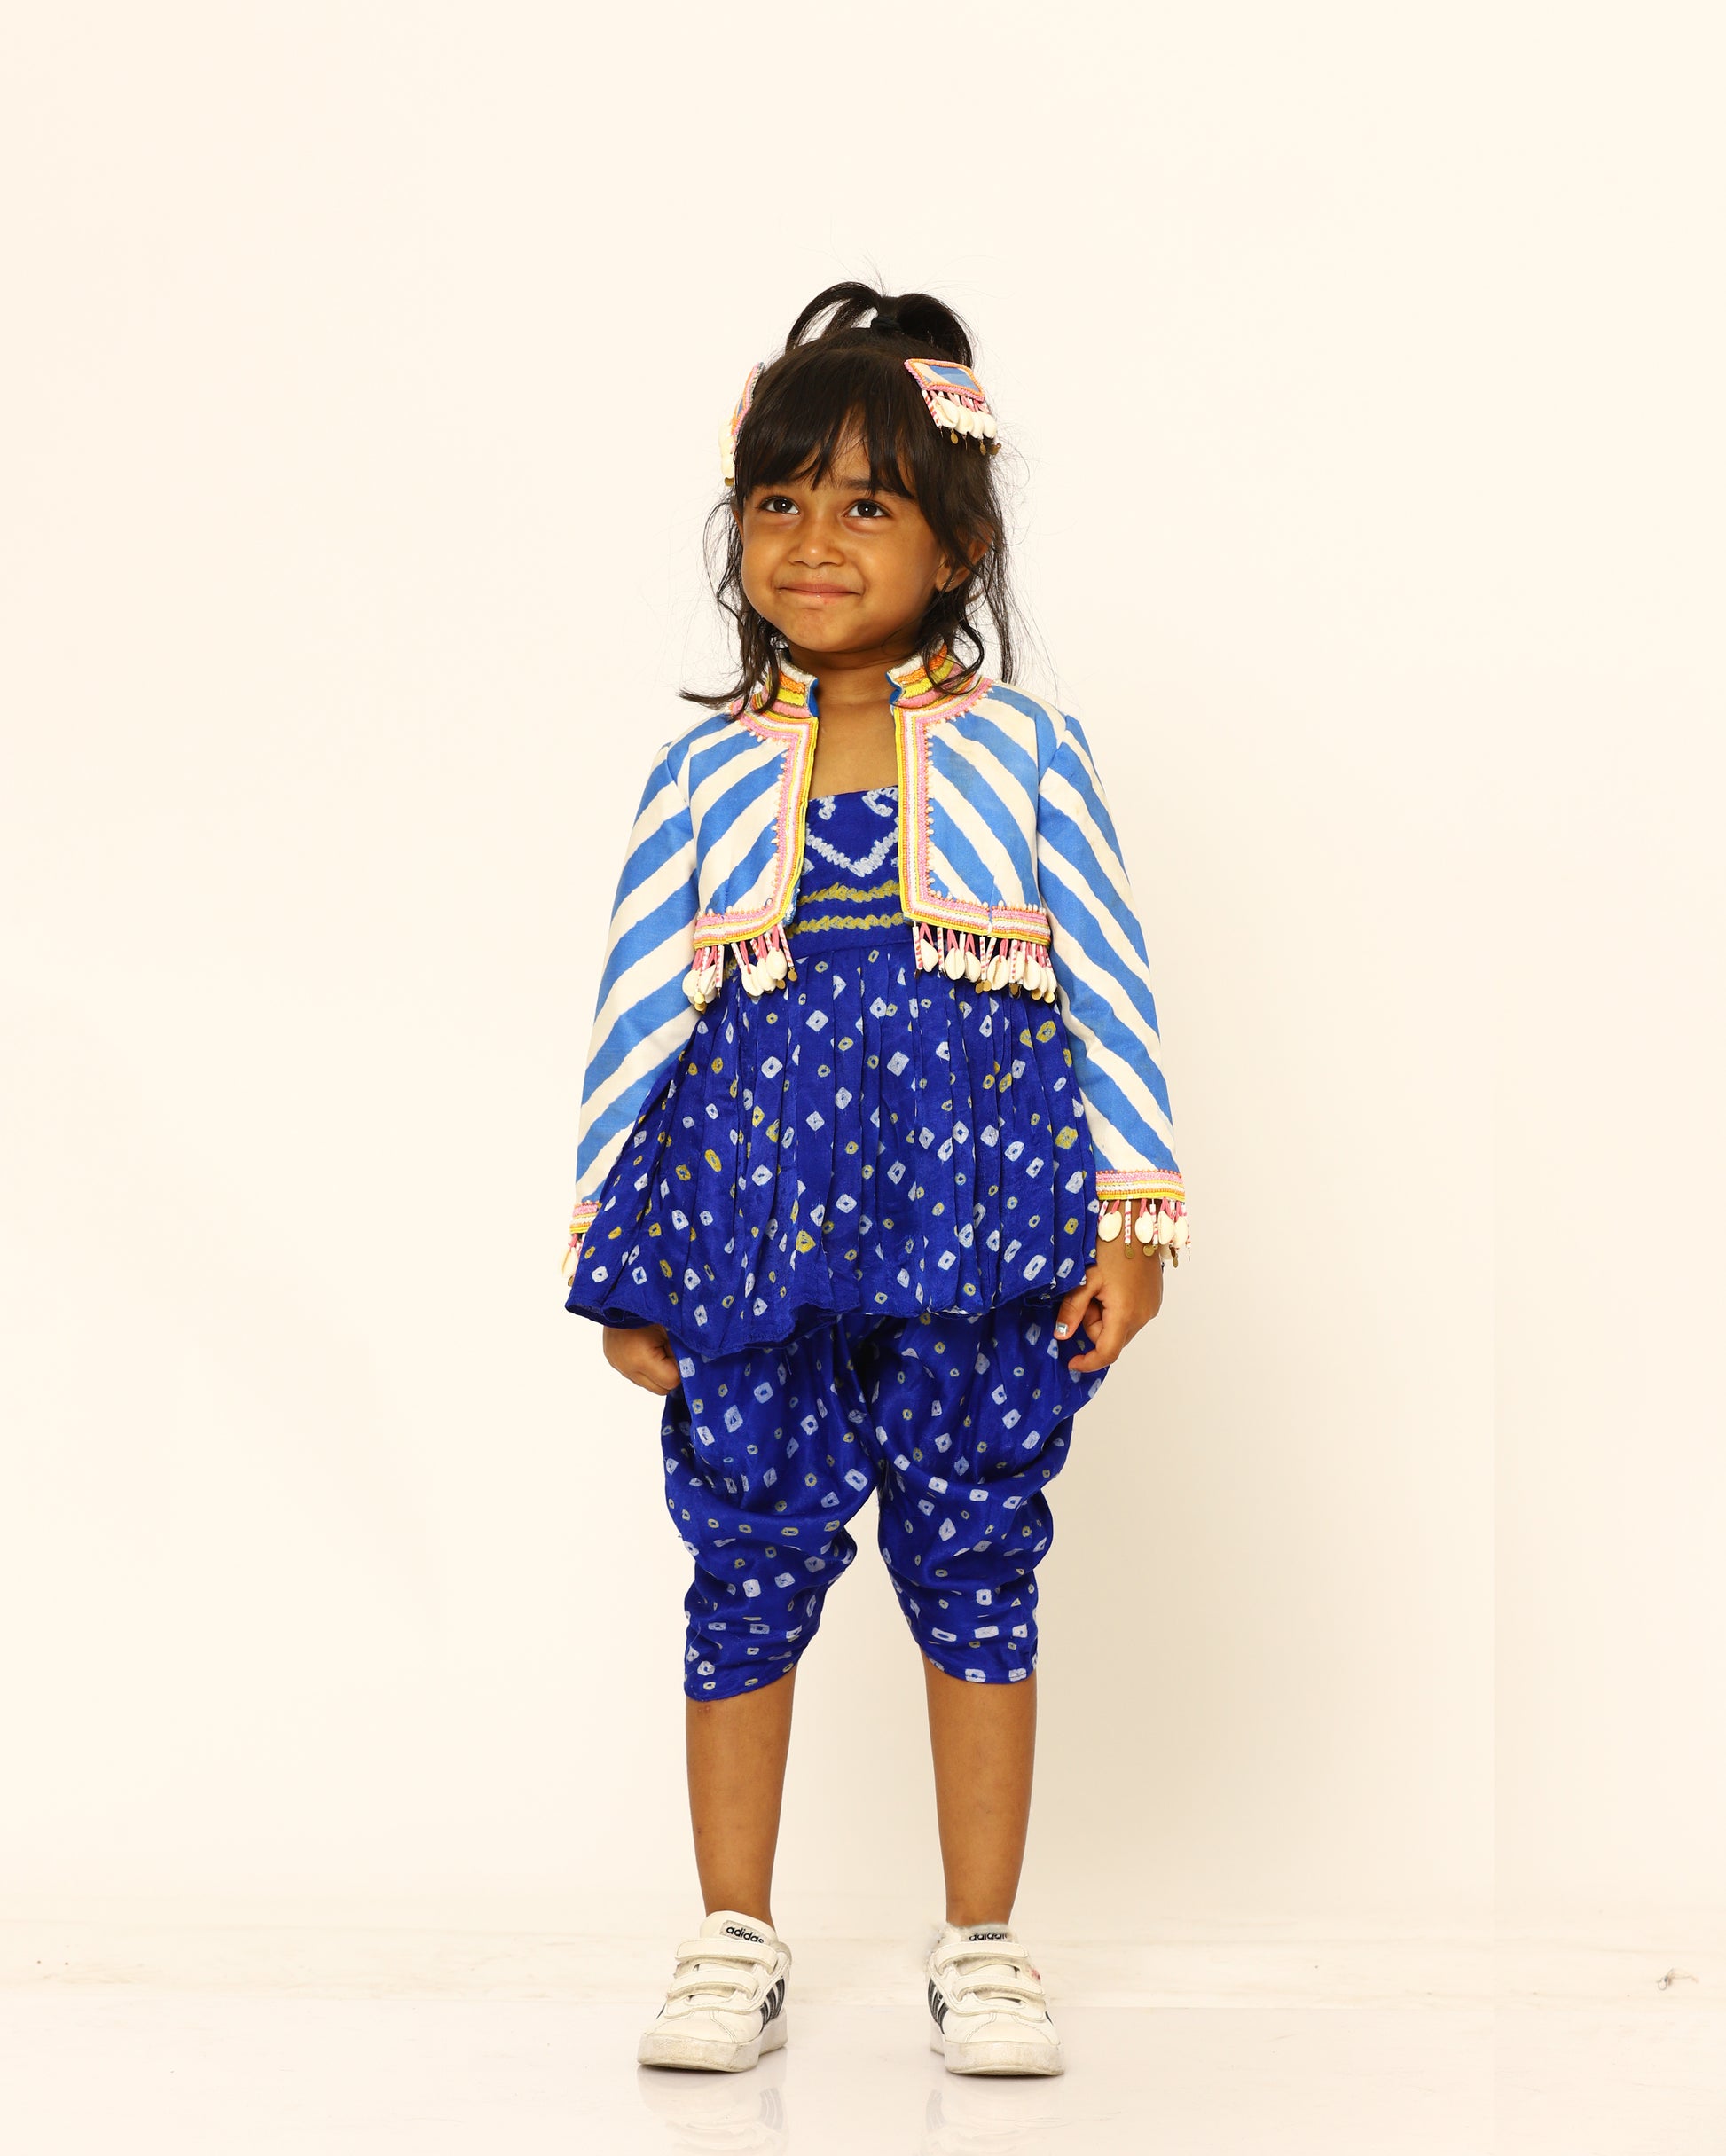 blue + striped + jacket + sea + shells + beads + sequins + clip + shoes + peplum + bandhani + cheerful + fest + vibes + front